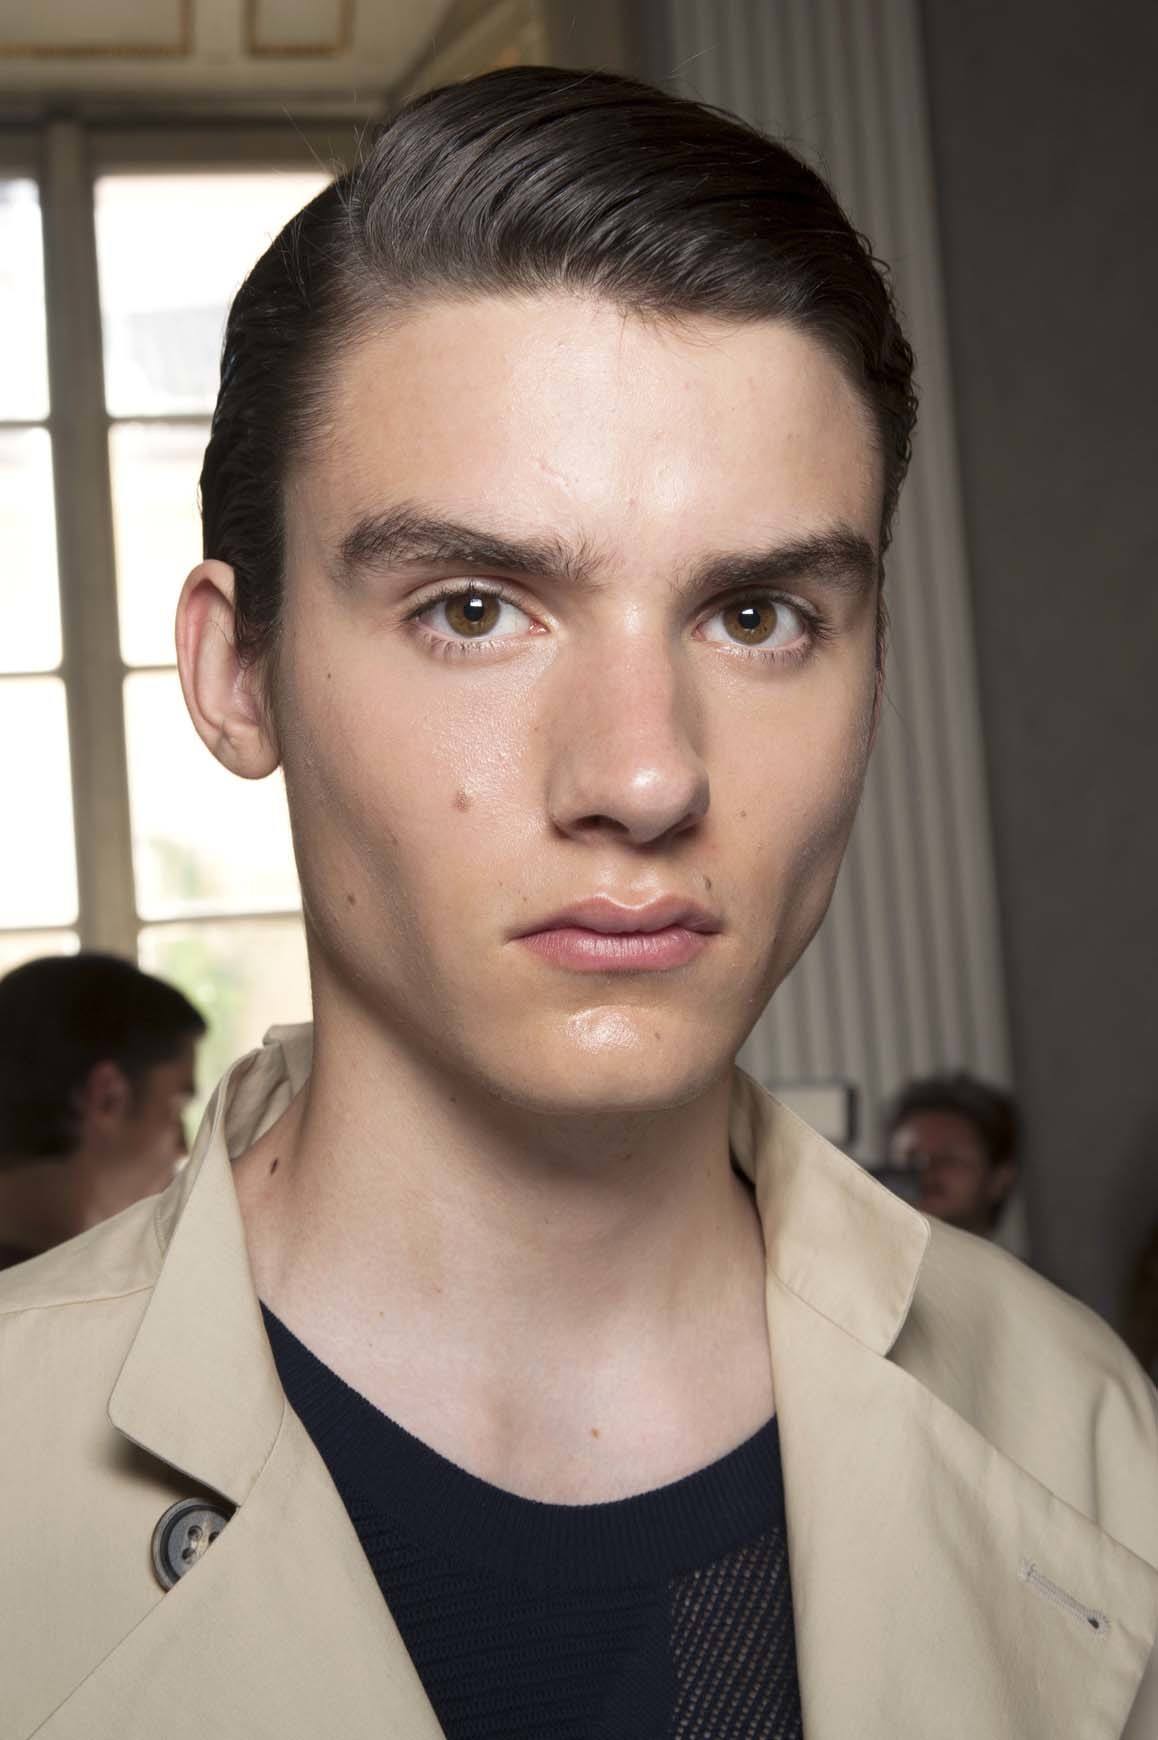 Sporty Haircut Styles: Looks to Inspire Your Next Cut